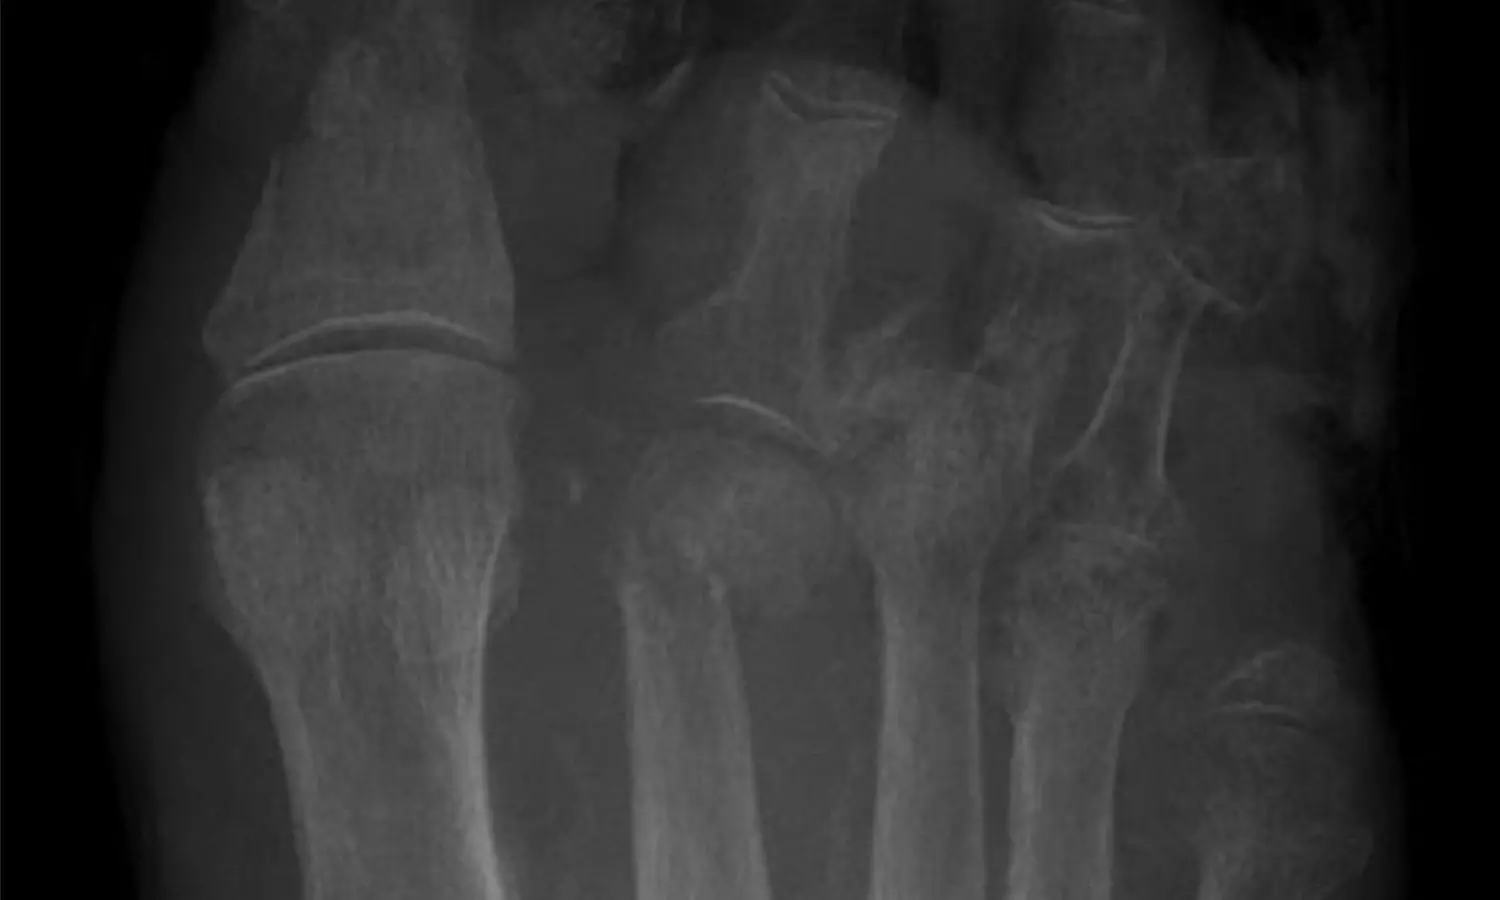 Elevated UACR levels increase mortality risk in diabetic foot osteomyelitis patients: Study